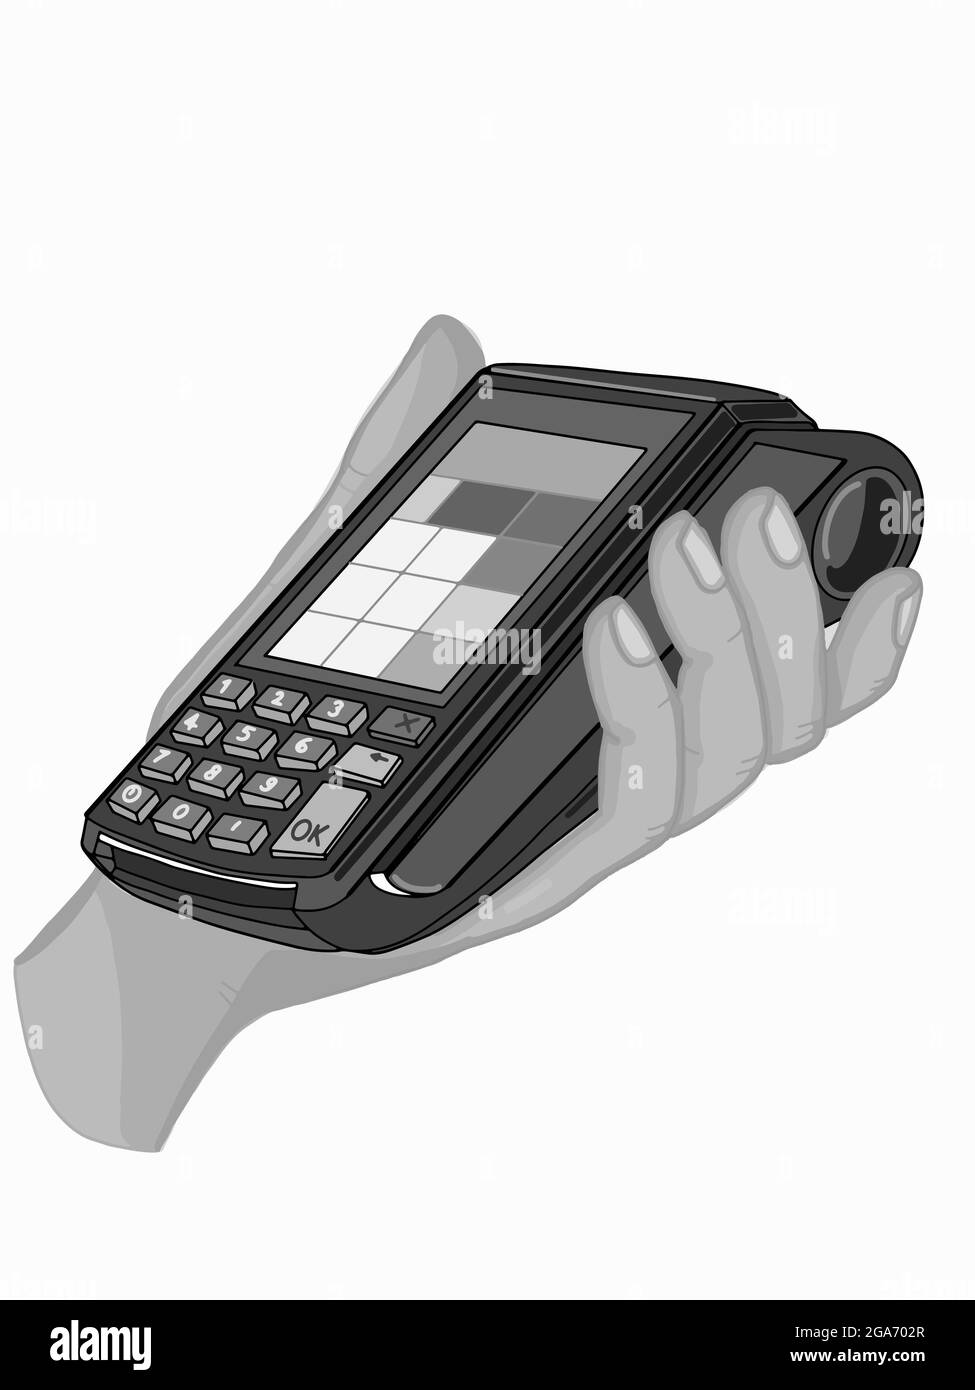 POS device, illustration icon, holding hand,credit card Stock Photo